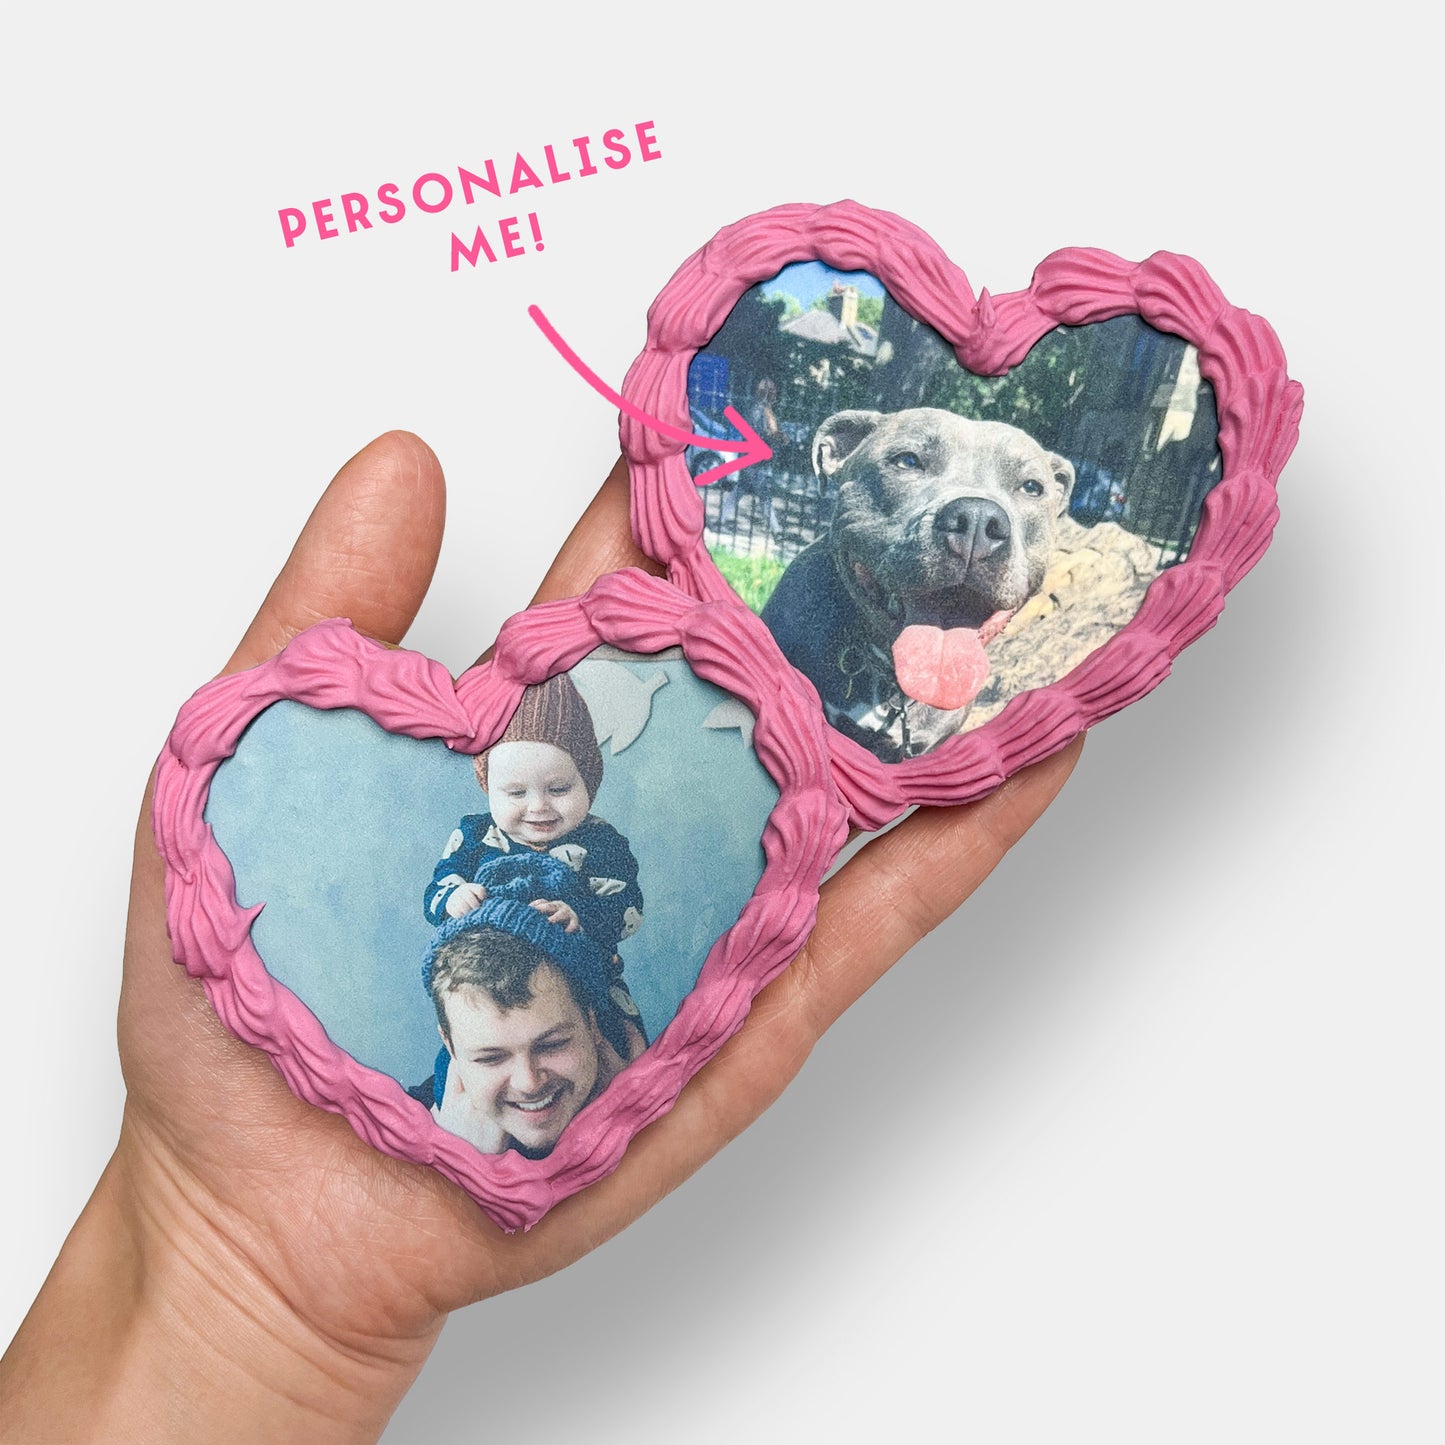 Edible Photo Heart Letterbox Cookie